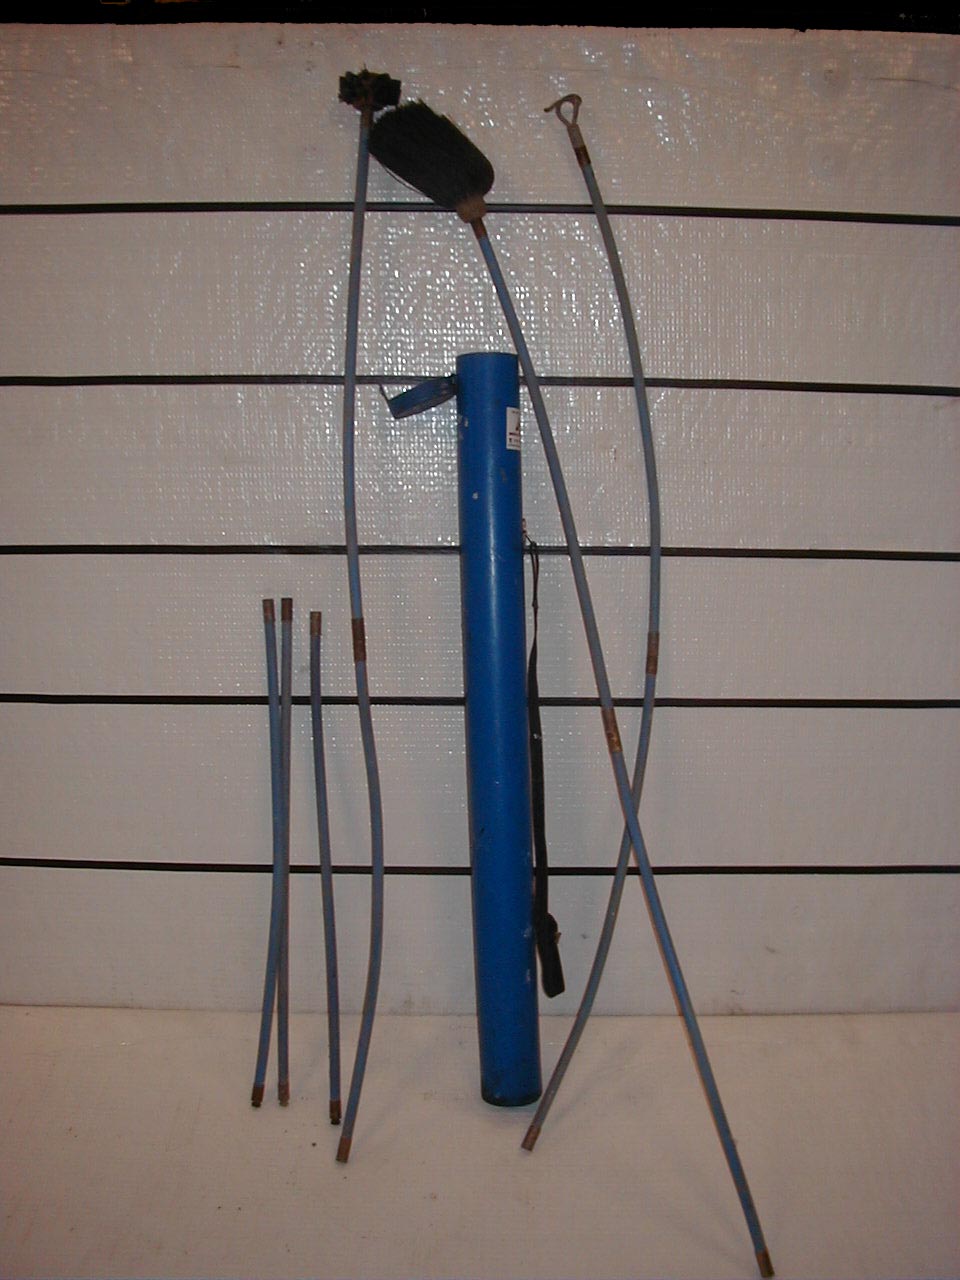 Drainage tools - Drain Cleaning Rods